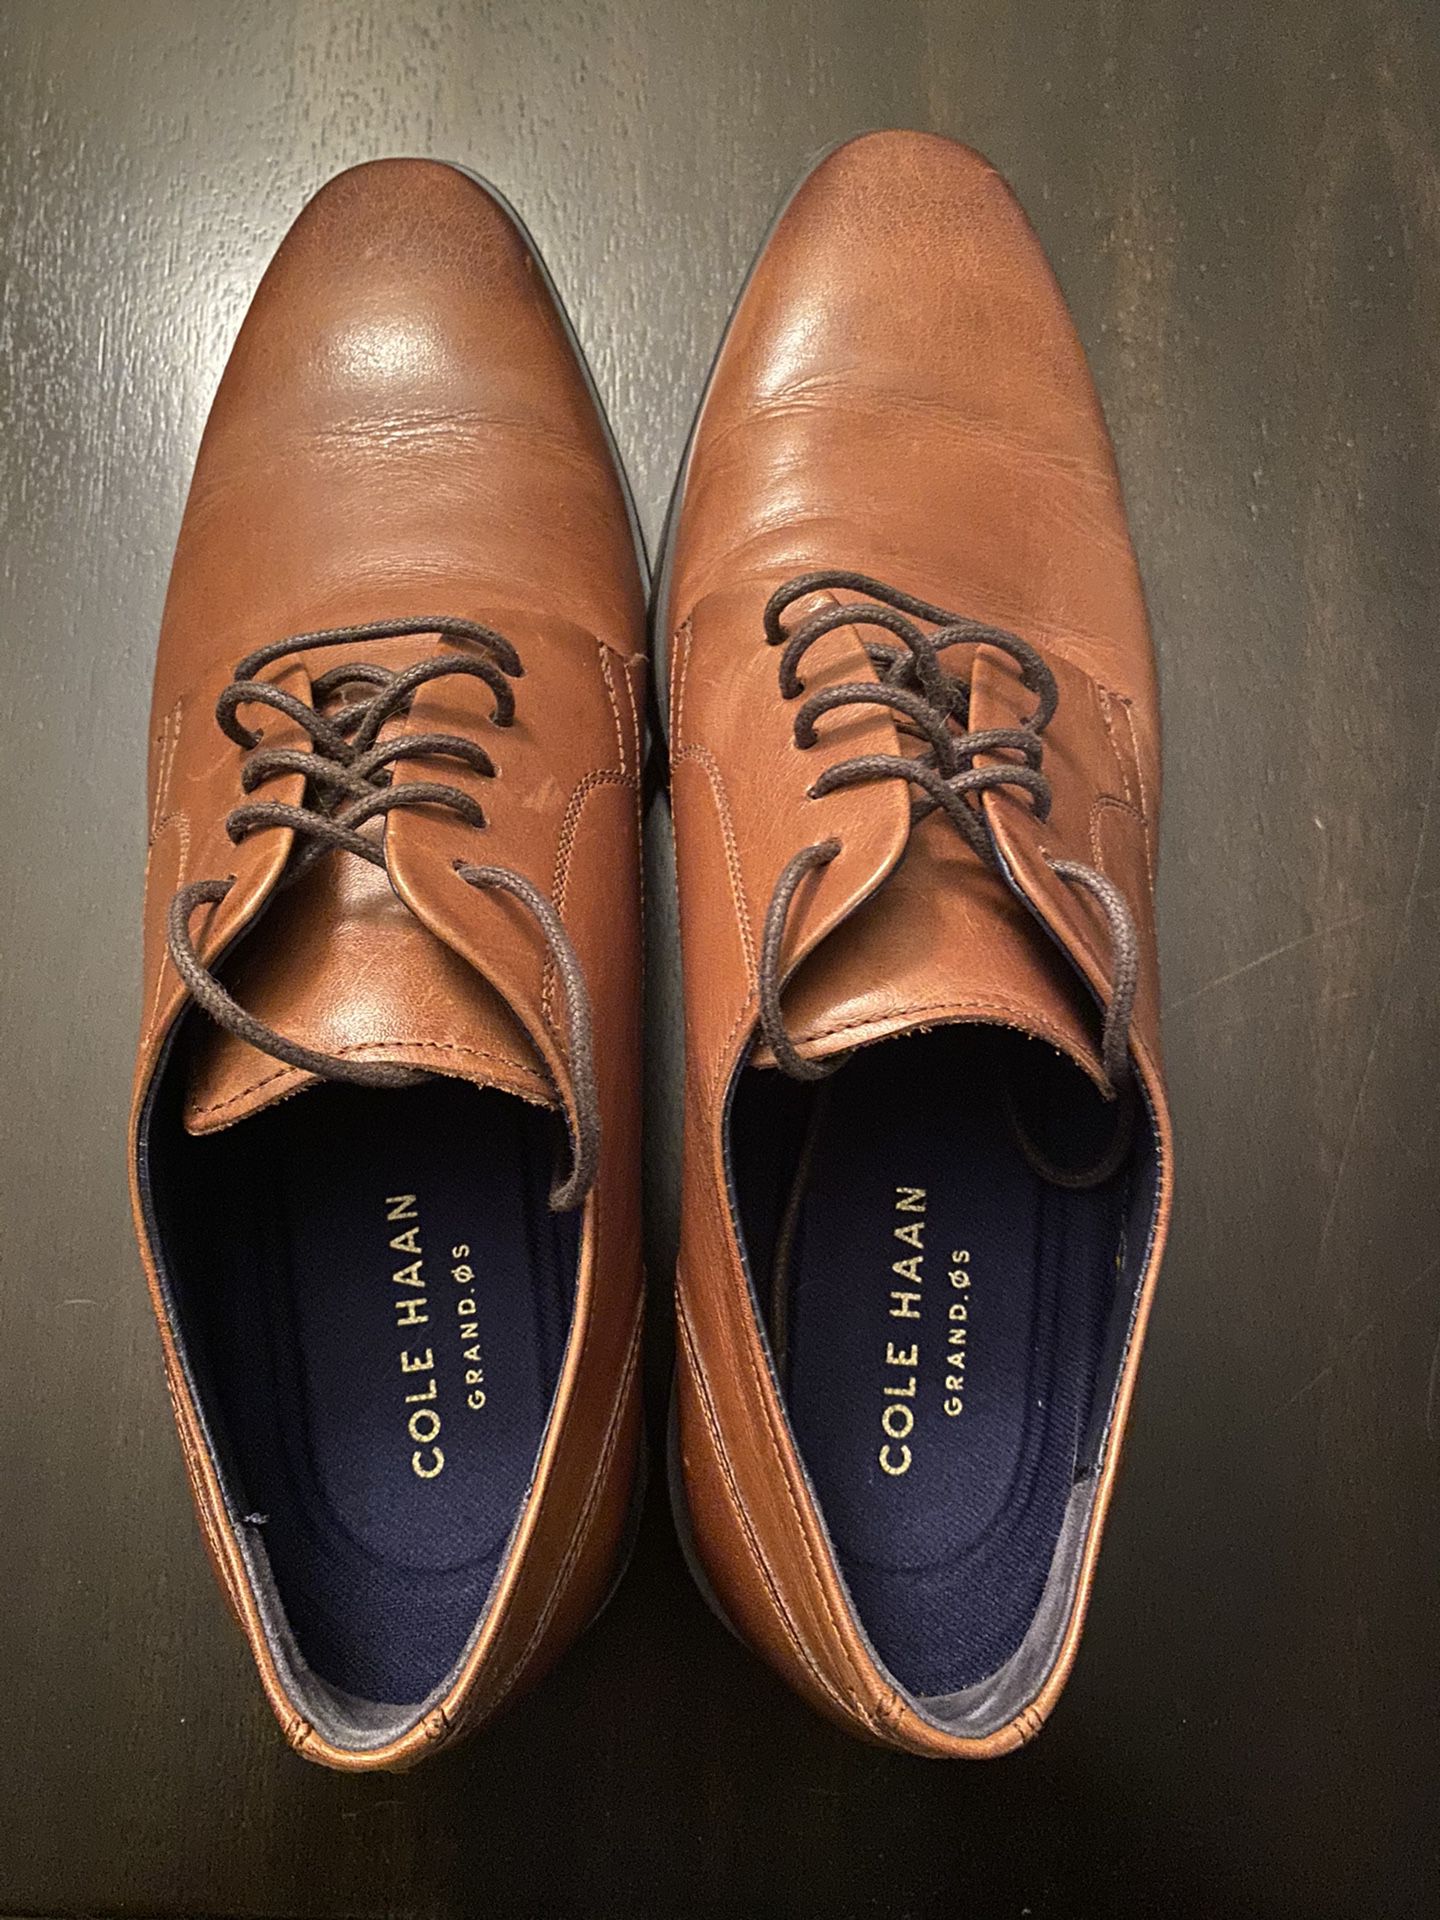 Brand new Cole Haan dress shoes 9.5